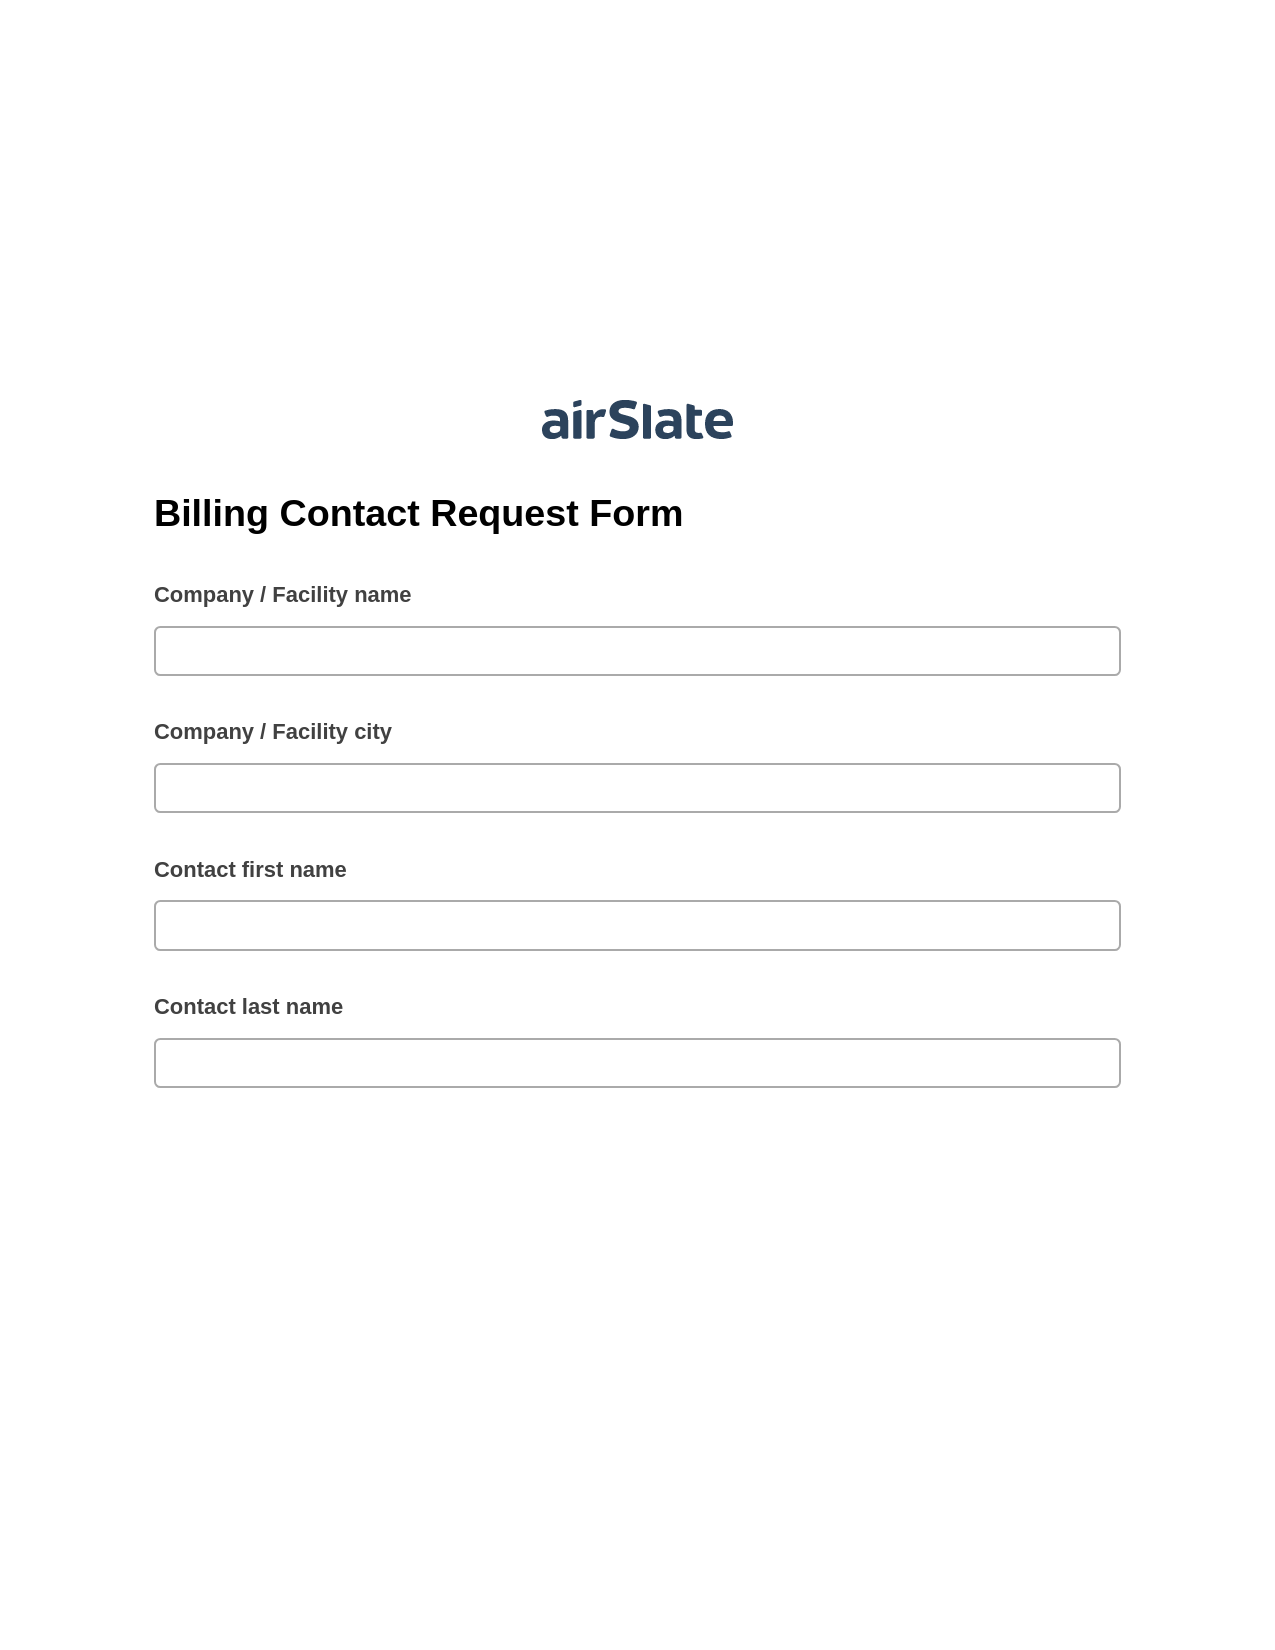 Multirole Billing Contact Request Form Pre-fill from Salesforce Record Bot, Update MS Dynamics 365 Records Bot, Post-finish Document Bot